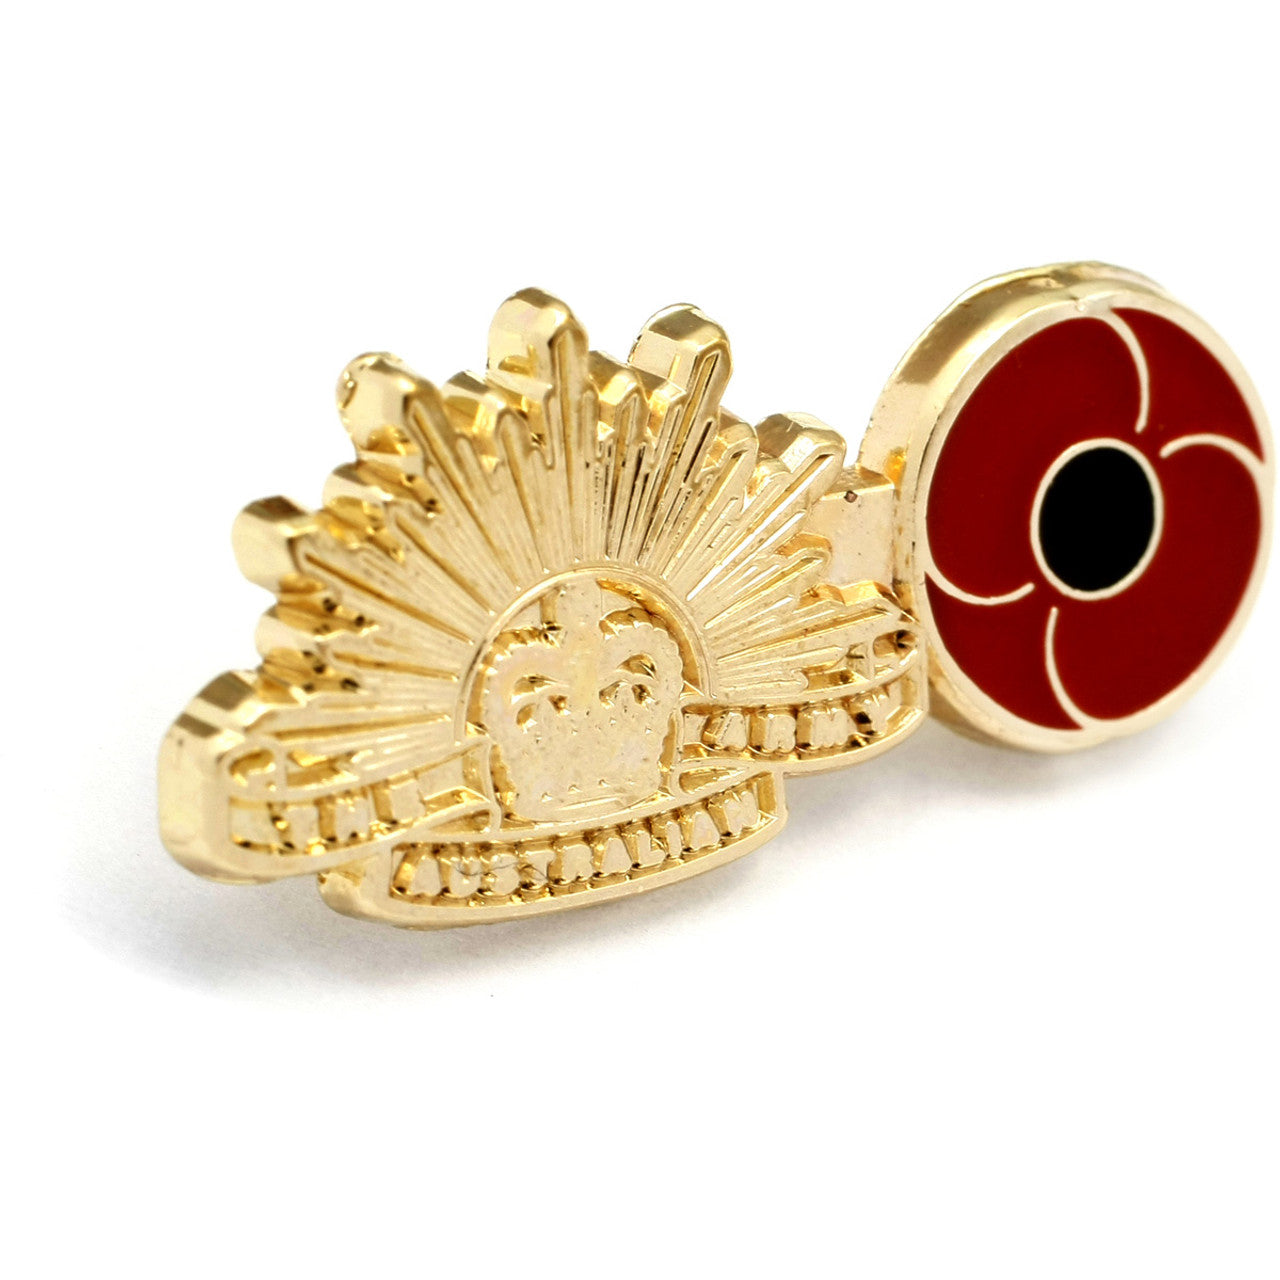 The stunning 25mm Rising Sun and remembrance poppy badge is a must-have accessory for all those who have served in the Australian Army. www.defenceqstore.com.au